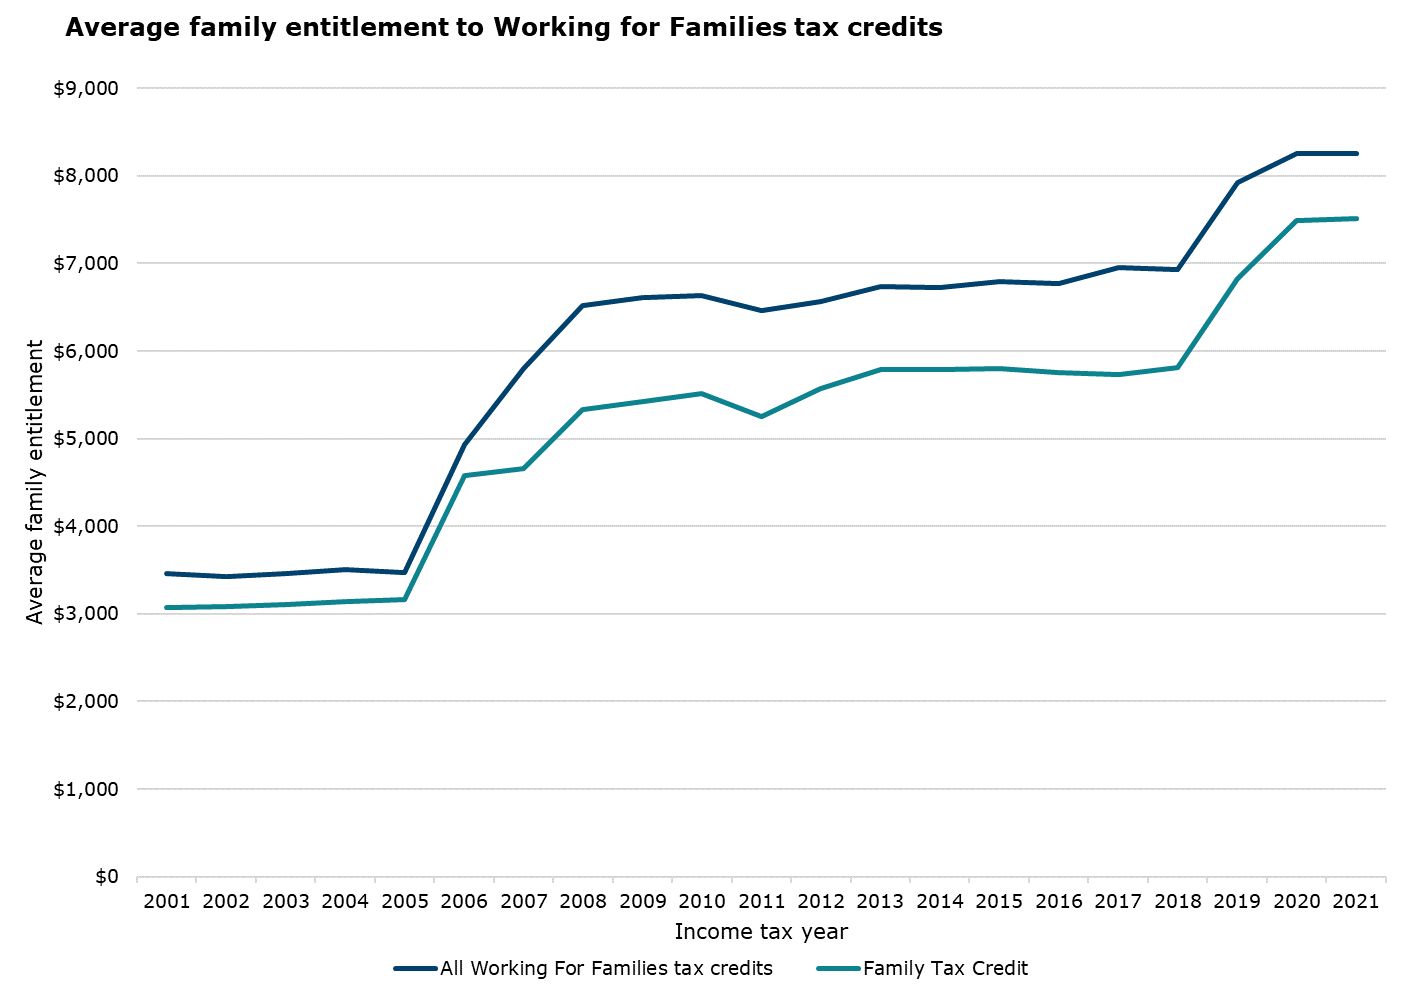 This graph shows the average amount of Working for Families tax credits a family was entitled to between the 2001 and 2021 tax years. The average Family tax credit entitlement has increased 144% from $3,075 in the 2001 tax year to $7,516 in the 2021 tax year. The average total combined Working for Families tax credit entitlement has increased 139% from $3,456 in the 2001 tax year to $8,259 in the 2021 tax year. This is displayed by two sharp jumps. First in 2005 and second in 2018. This is reflected in both credit types.